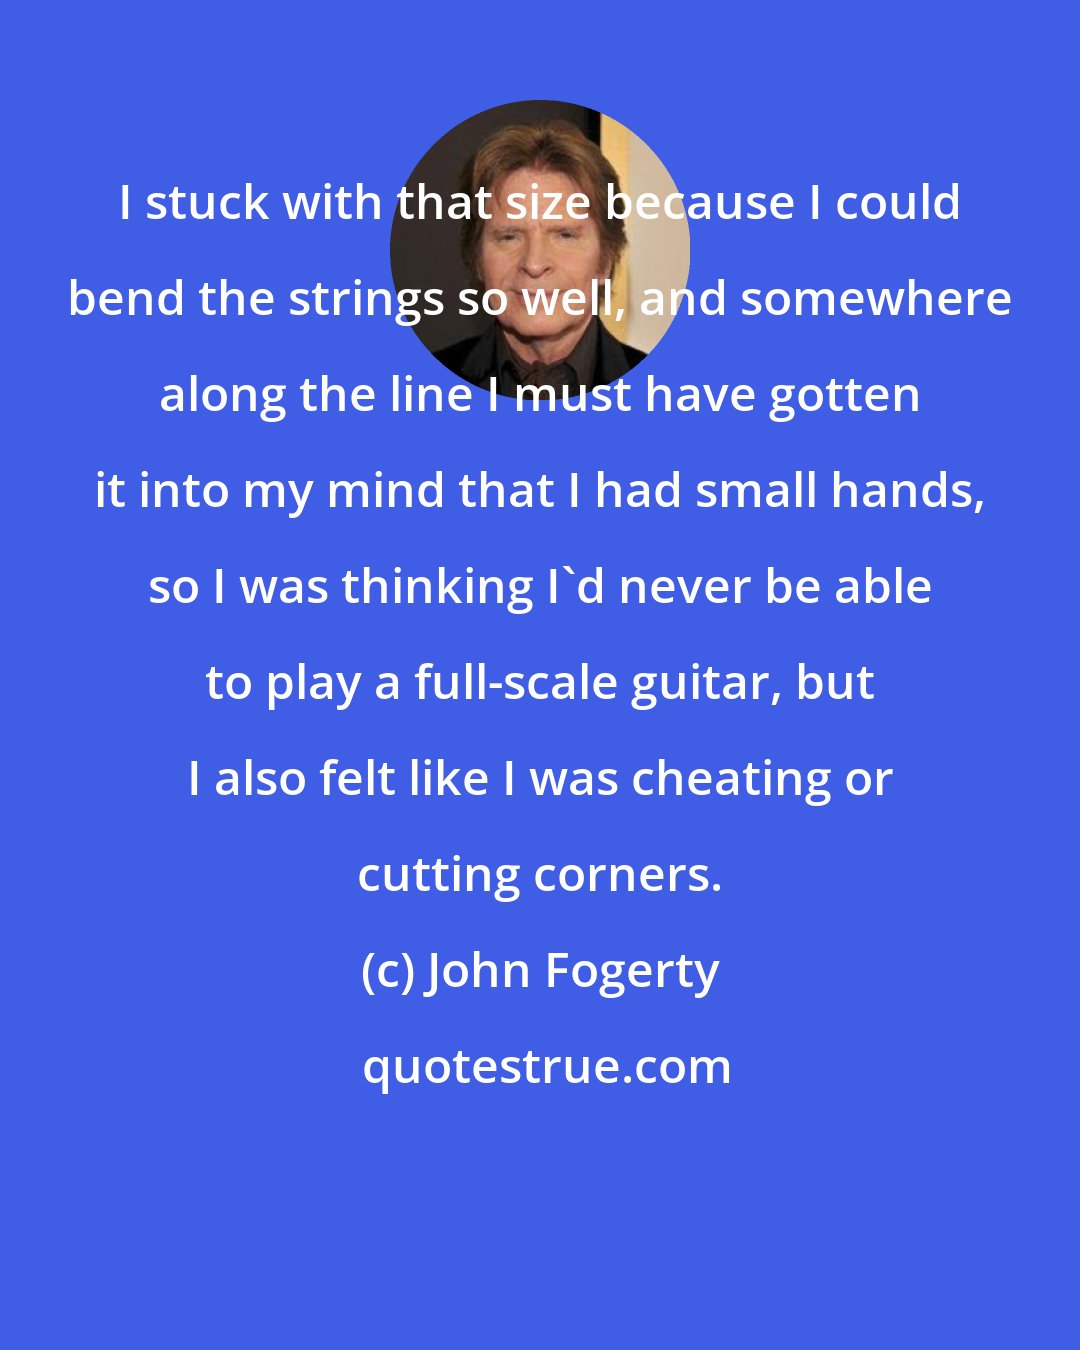 John Fogerty: I stuck with that size because I could bend the strings so well, and somewhere along the line I must have gotten it into my mind that I had small hands, so I was thinking I'd never be able to play a full-scale guitar, but I also felt like I was cheating or cutting corners.